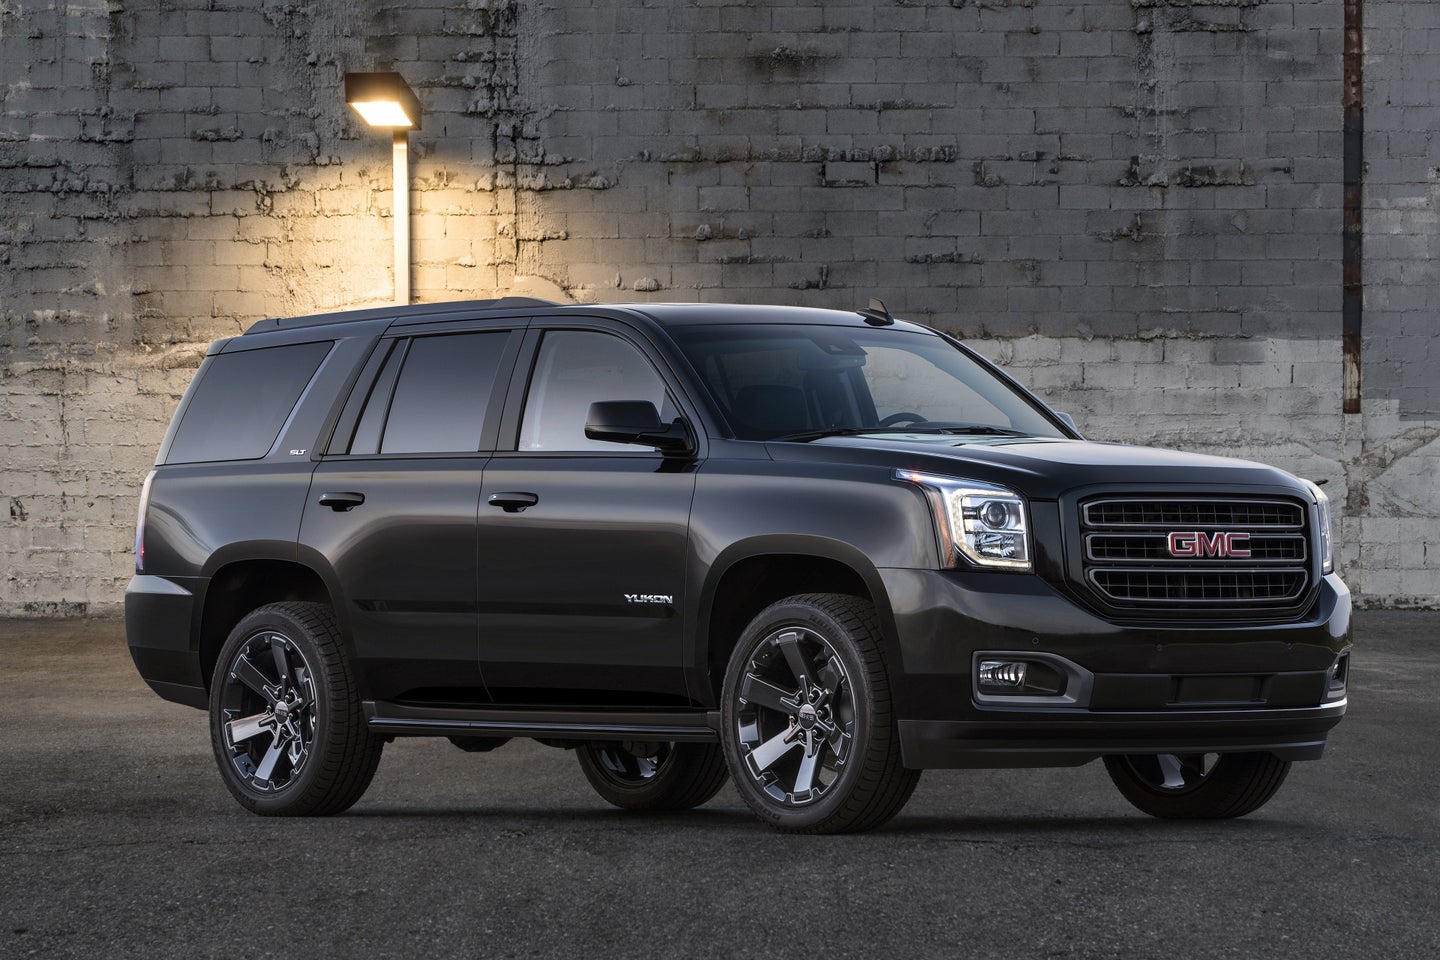 All-New Graphite Editions Bring the Dark Side to the 2019 GMC Yukon SUV Range - Front Side View